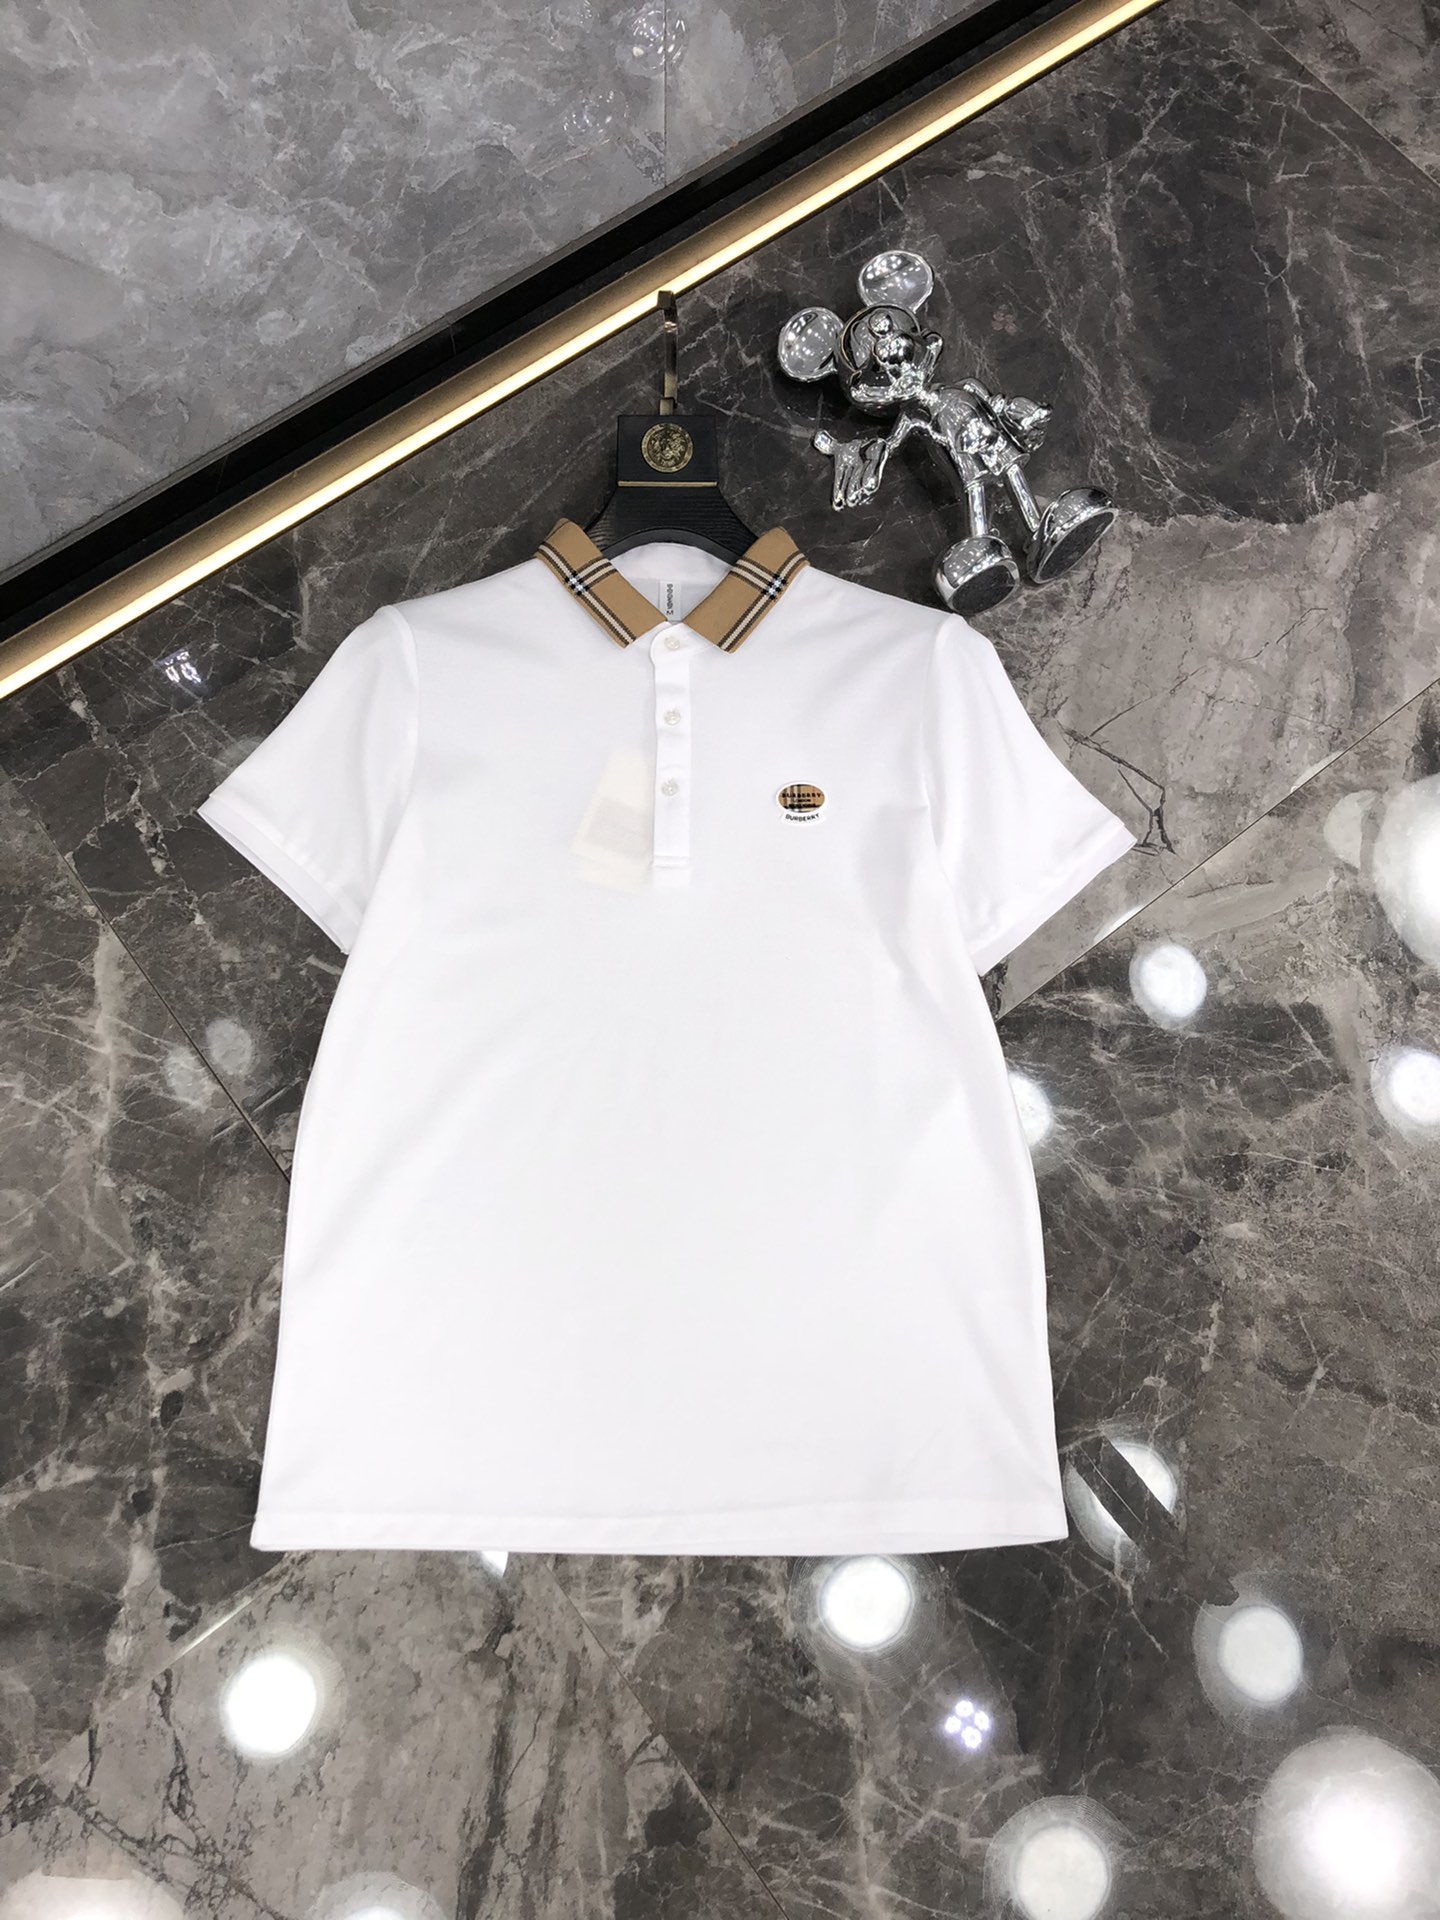 Burberry Fake
 Clothing Polo T-Shirt High Quality Customize
 White Summer Collection Short Sleeve